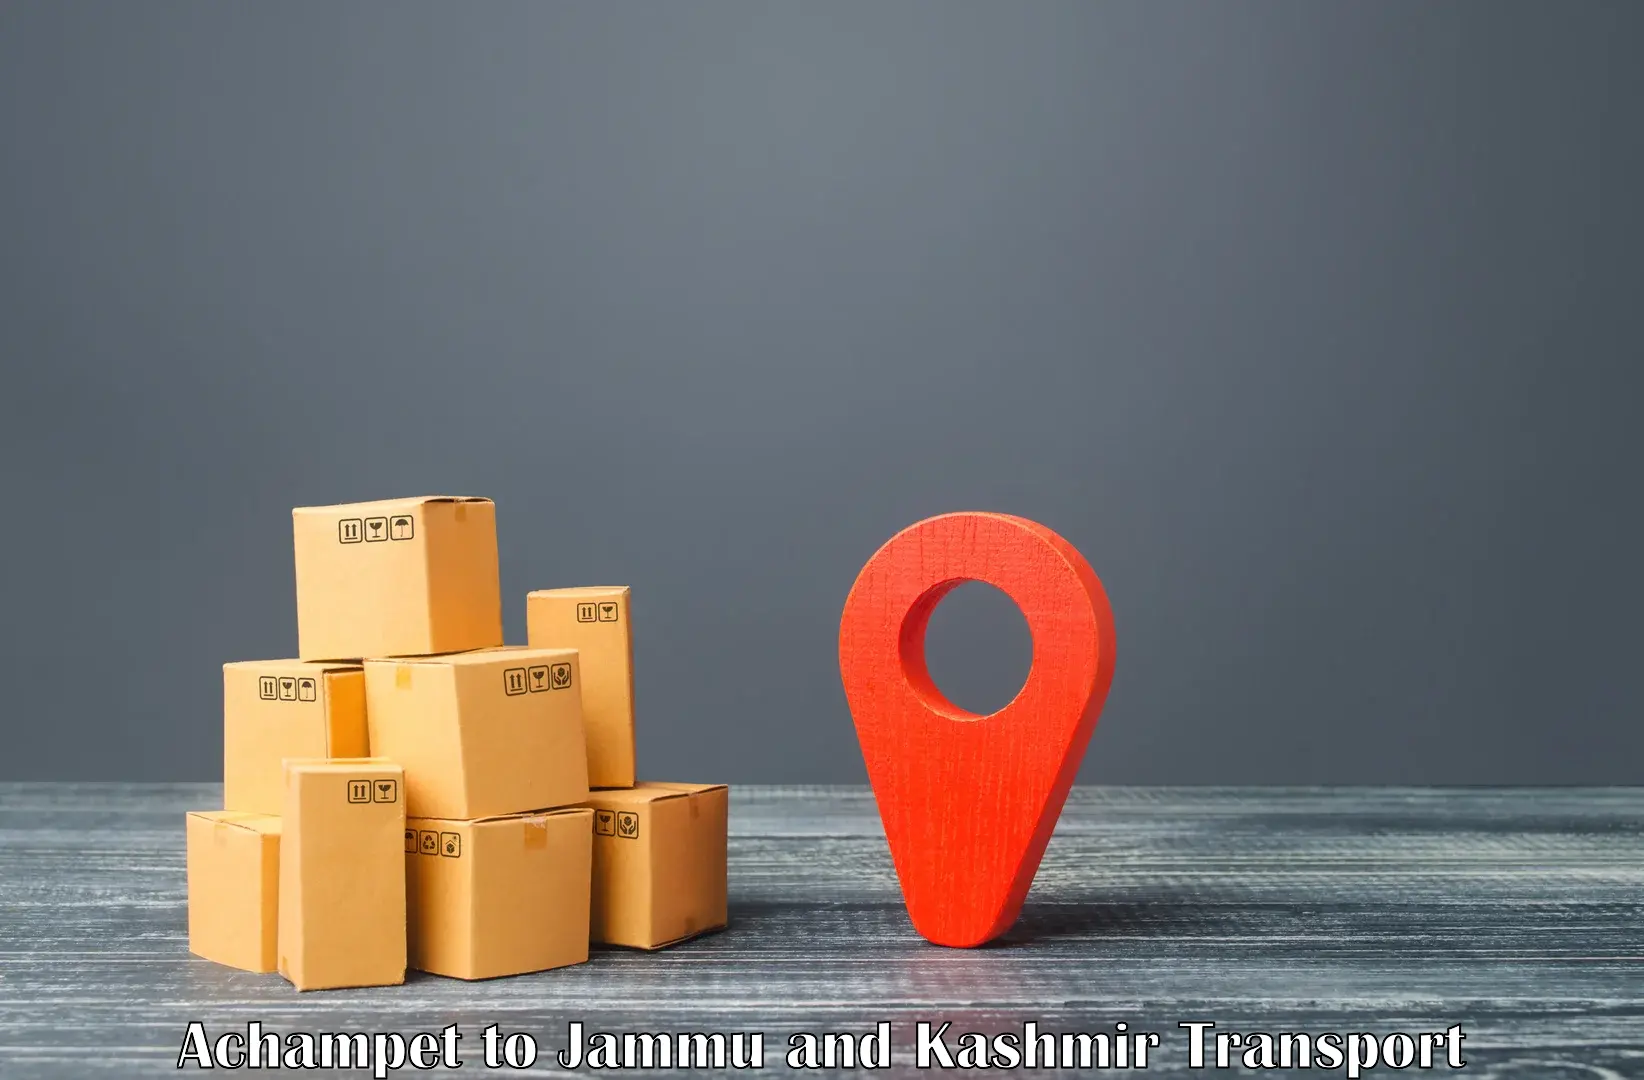 Domestic goods transportation services Achampet to Jammu and Kashmir